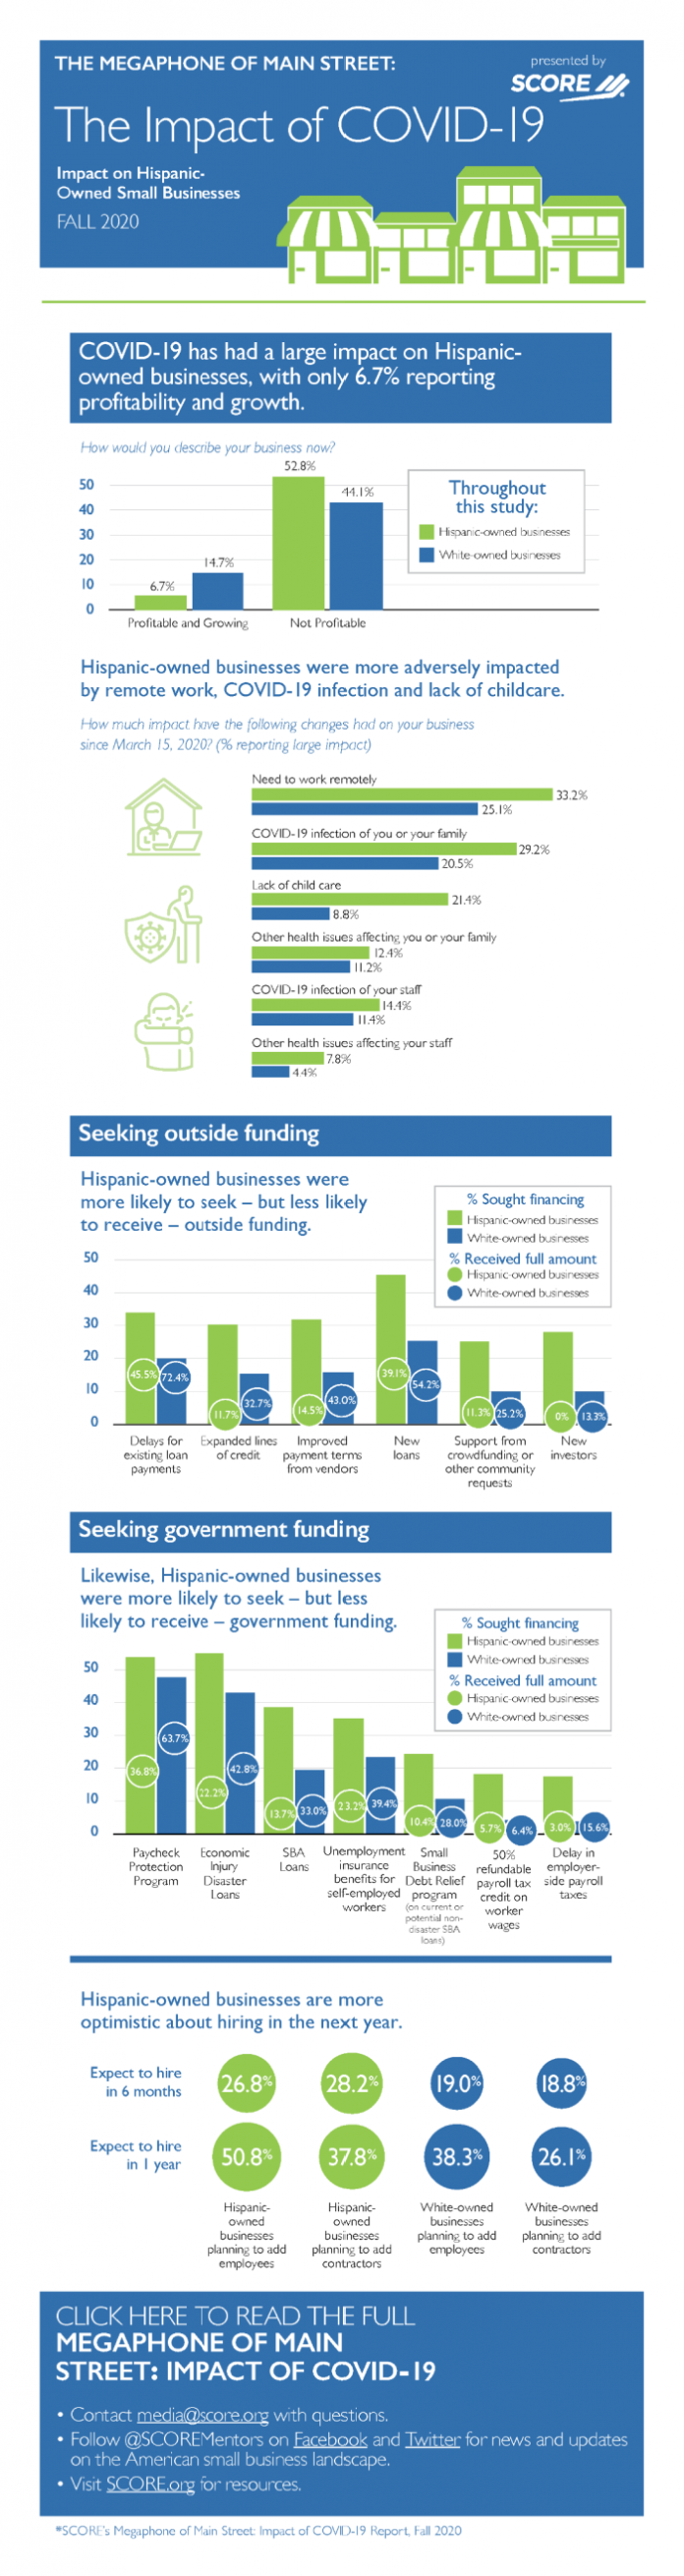 SCORE Looks at Impact of COVID-19 on Small Business in the US